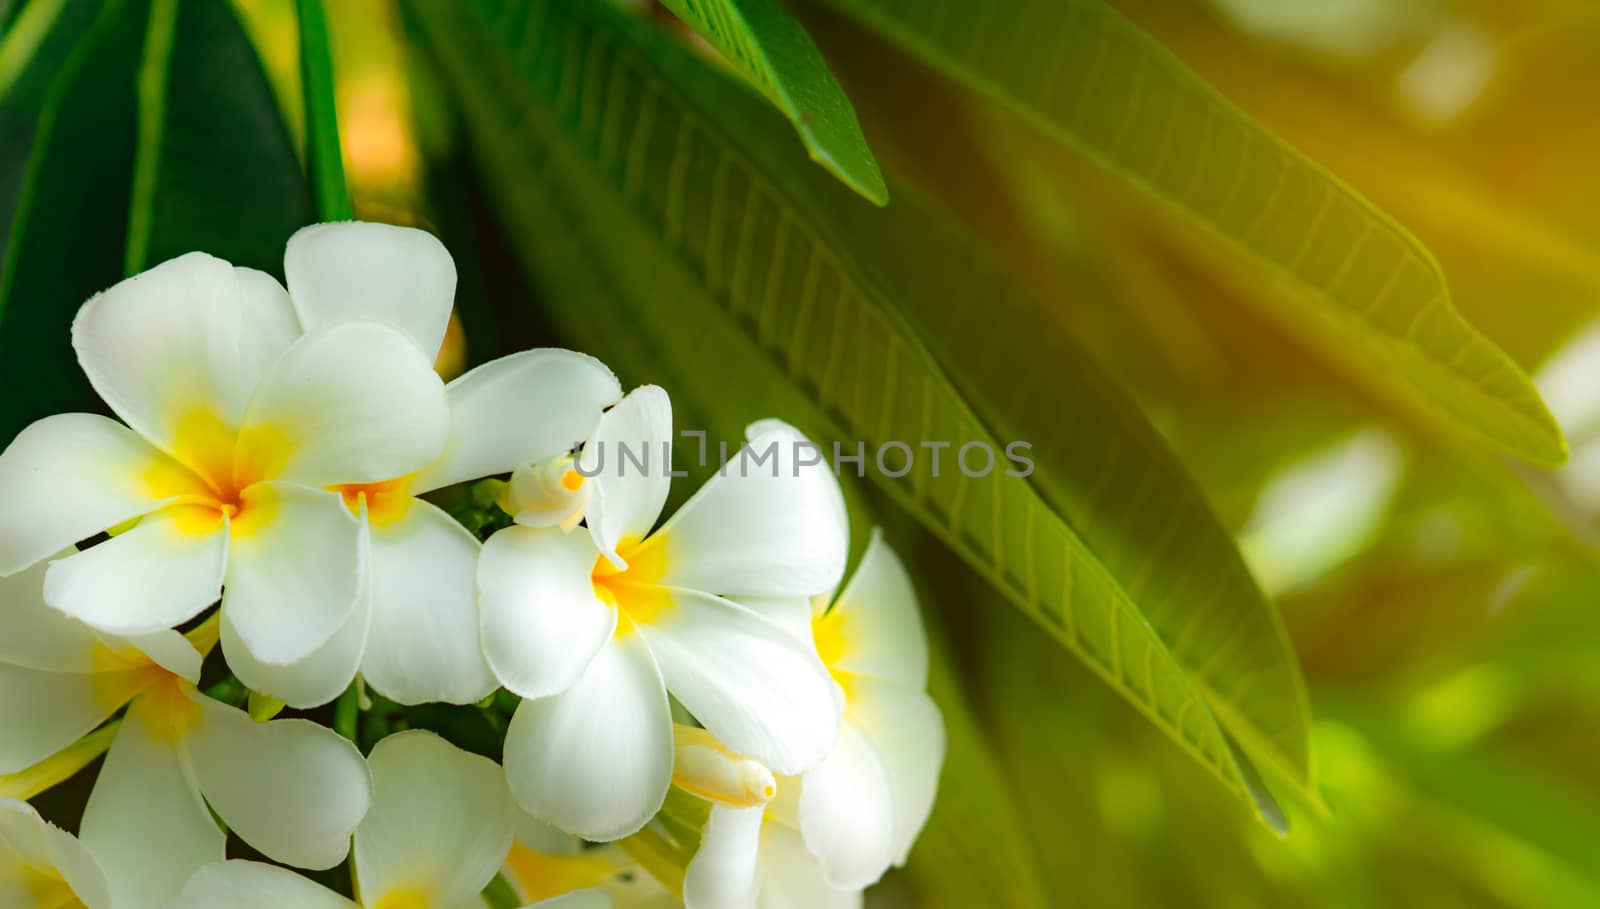 Frangipani flower (Plumeria alba) with green leaves on blurred background. White flowers with yellow at center. Health and spa background. Summer spa concept. Relax emotion.